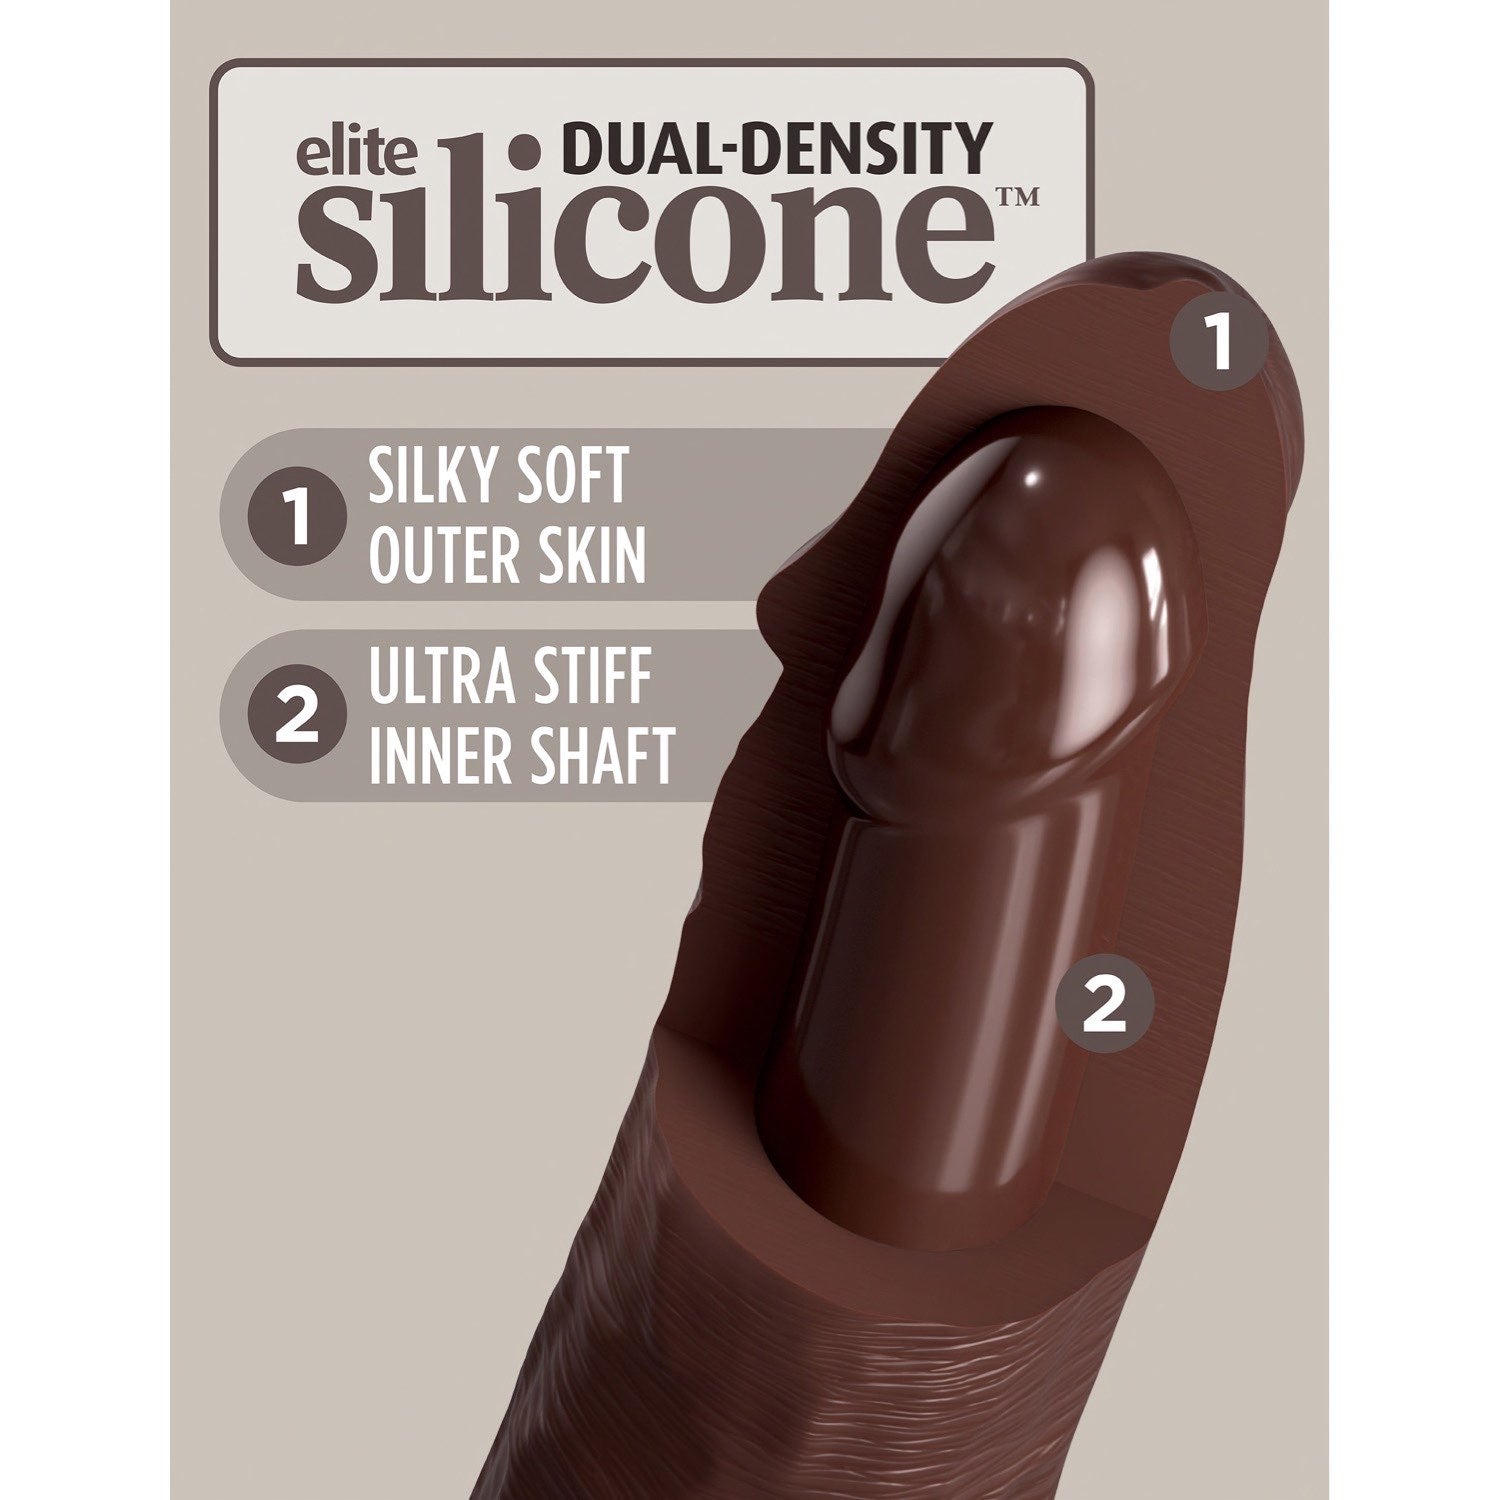 King Cock Elite 7&quot; Vibrating Dual Density Cock with Remote - Tan 17.8 cm USB Rechargeable Vibrating Dong by Pipedream